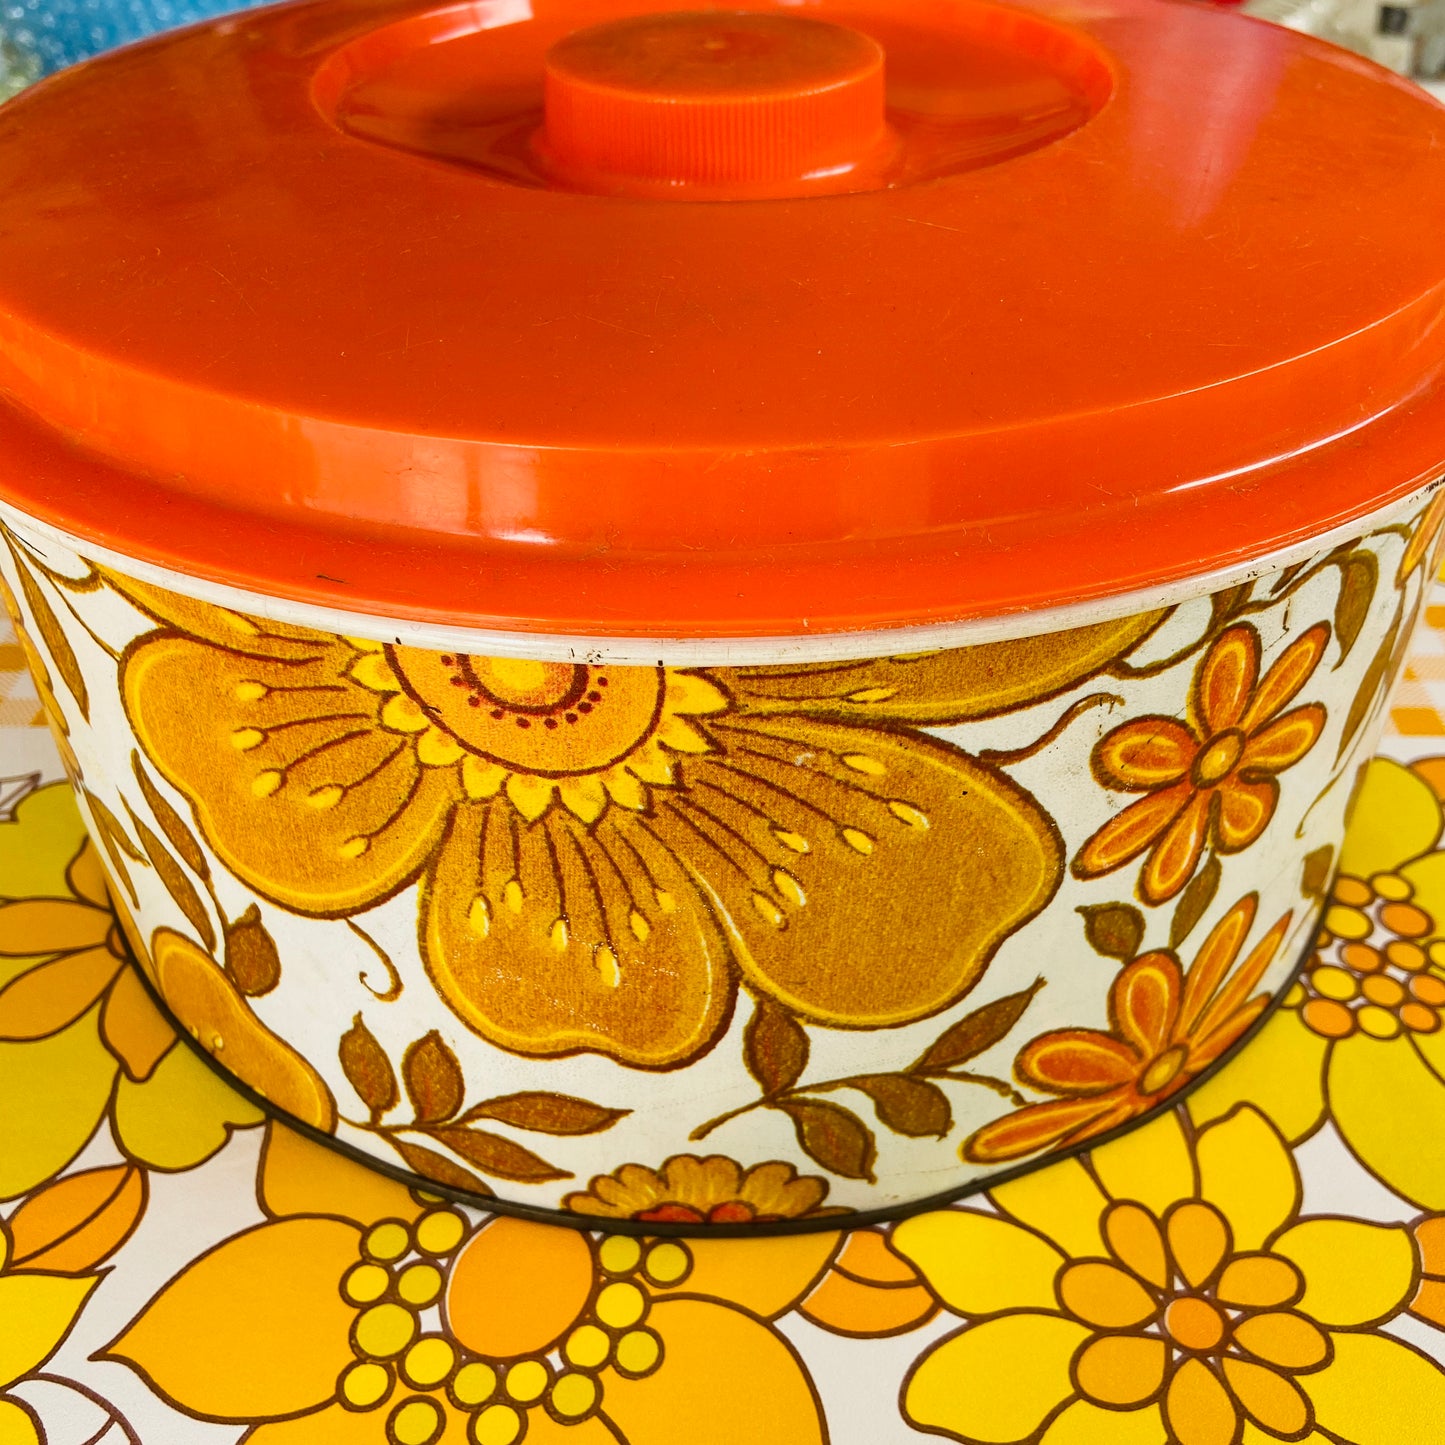 Willow Bread Cake Biscuit TIN Floral Retro Kitchen 70's